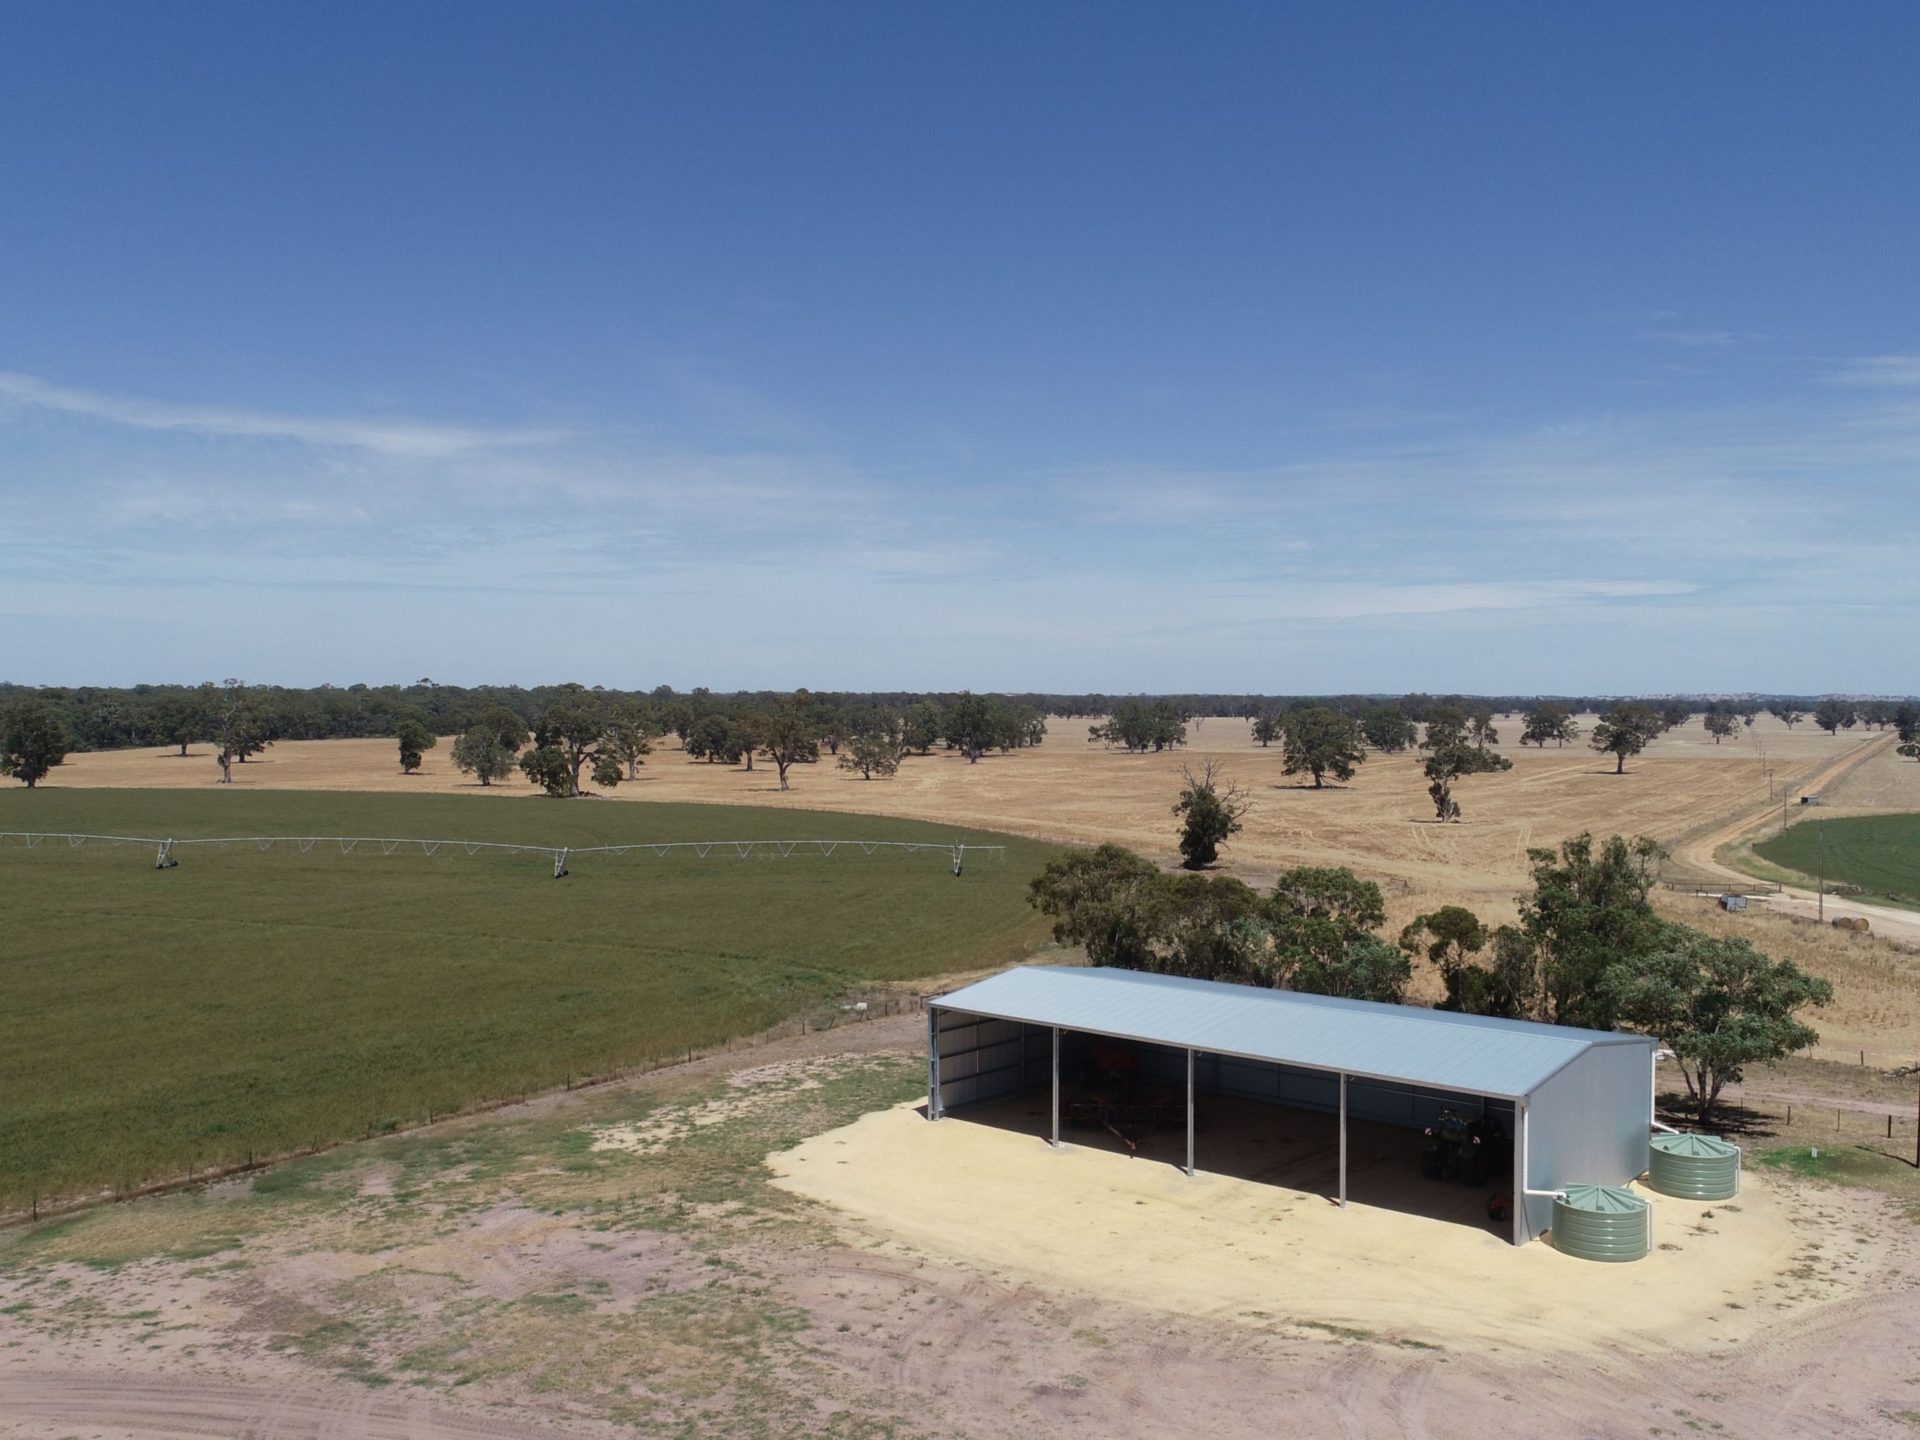 You are currently viewing 32m x 15m x 6m open-front hay shed